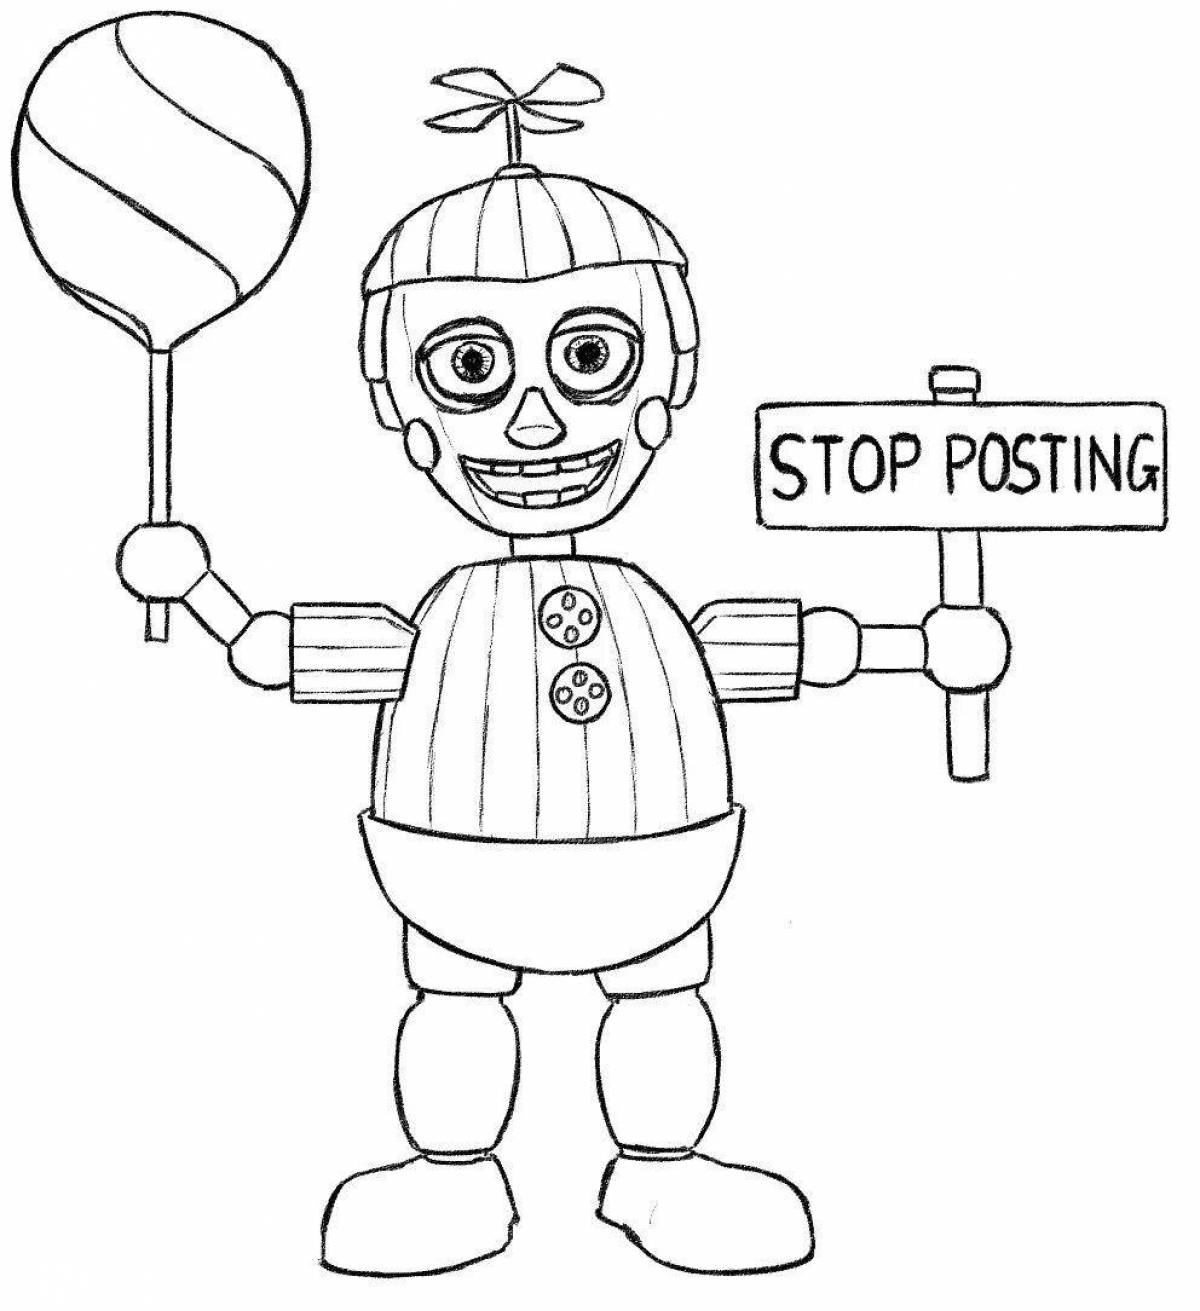 Coloring page dazzling animatronic seal